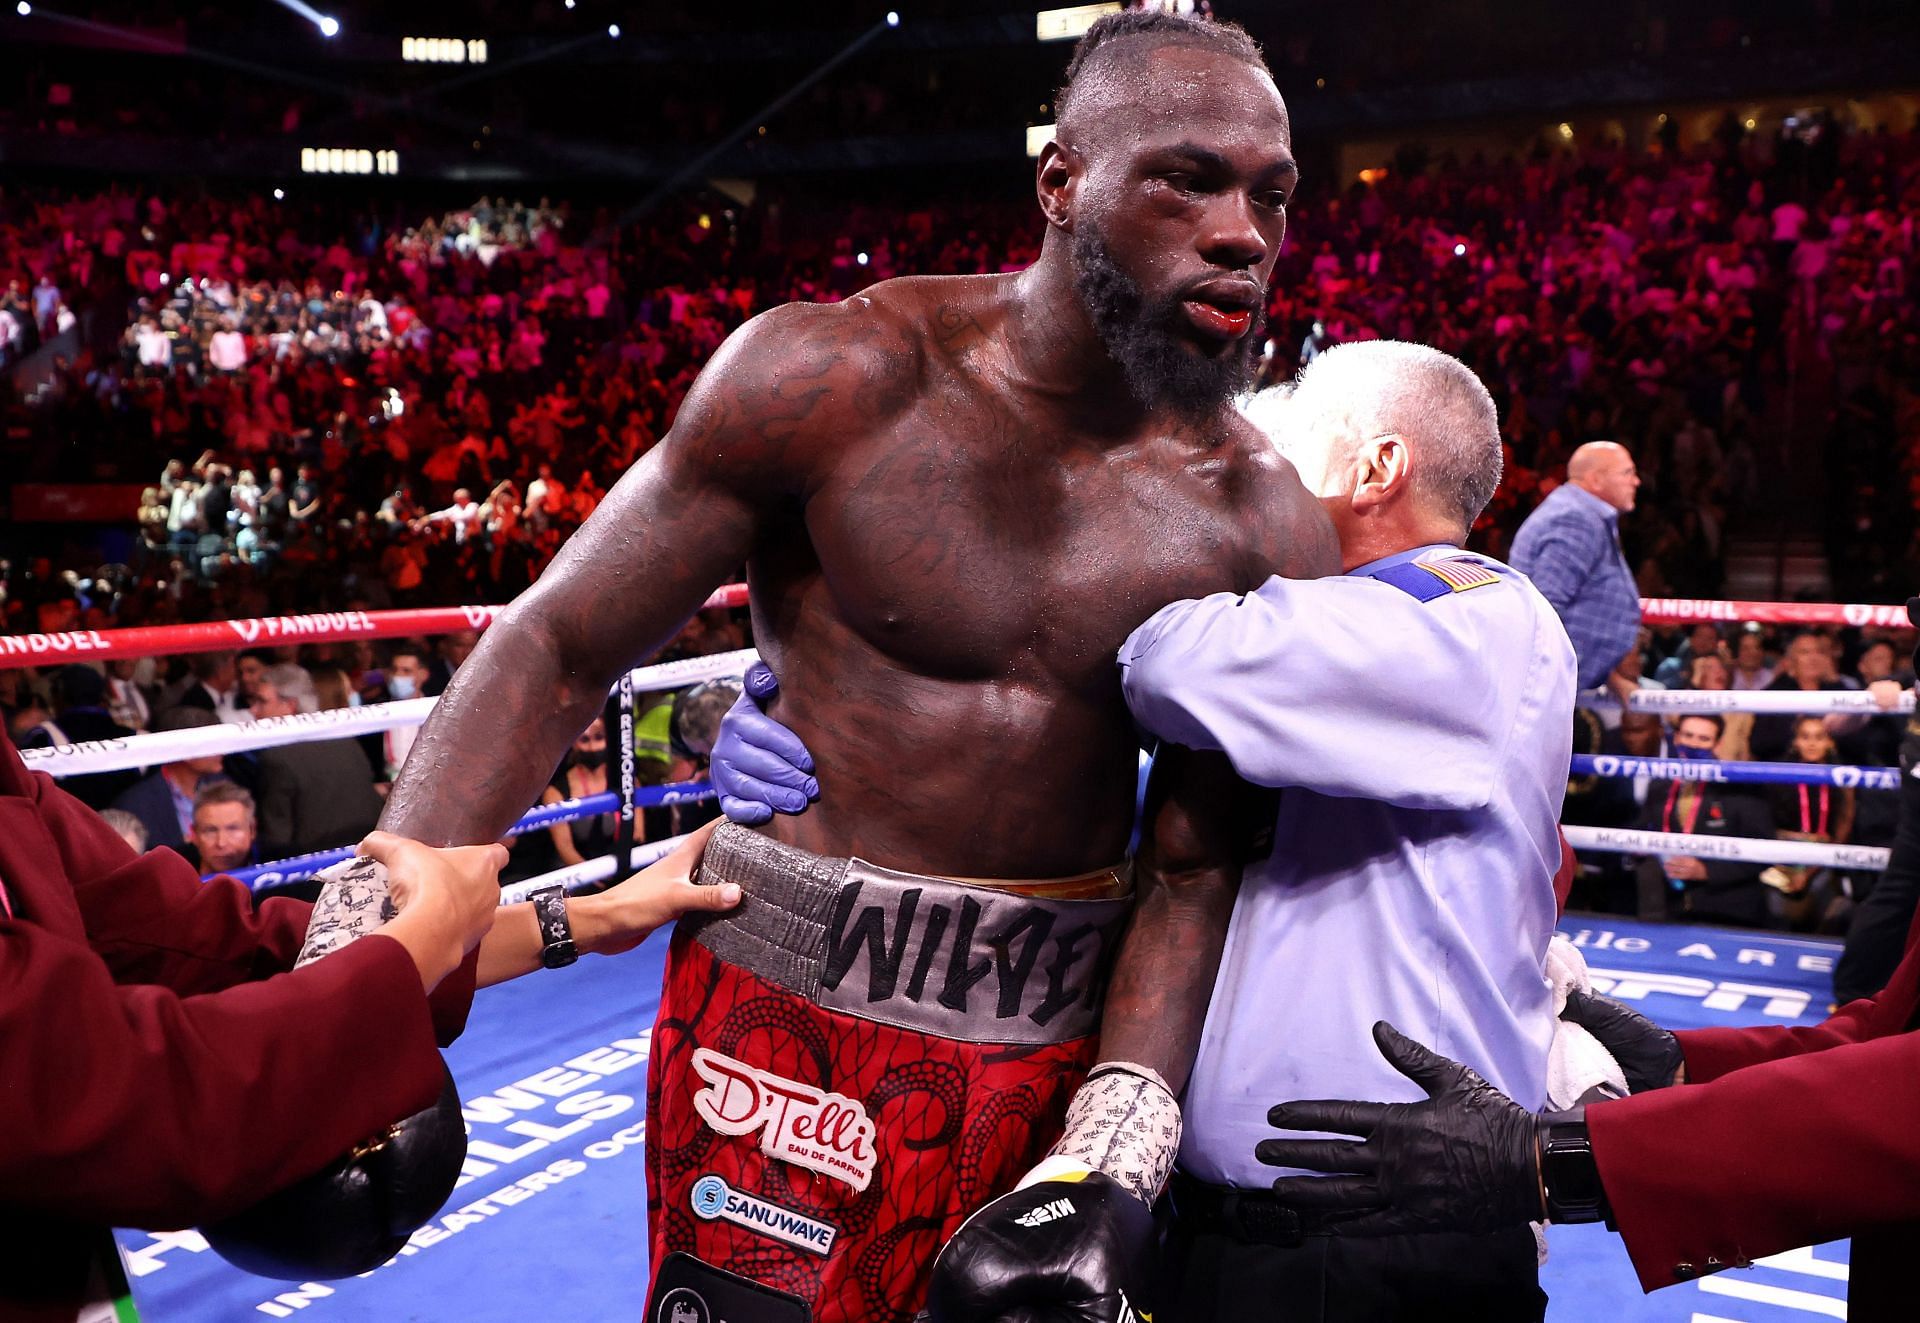 Deontay Wilder after being stopped by Tyson Fury